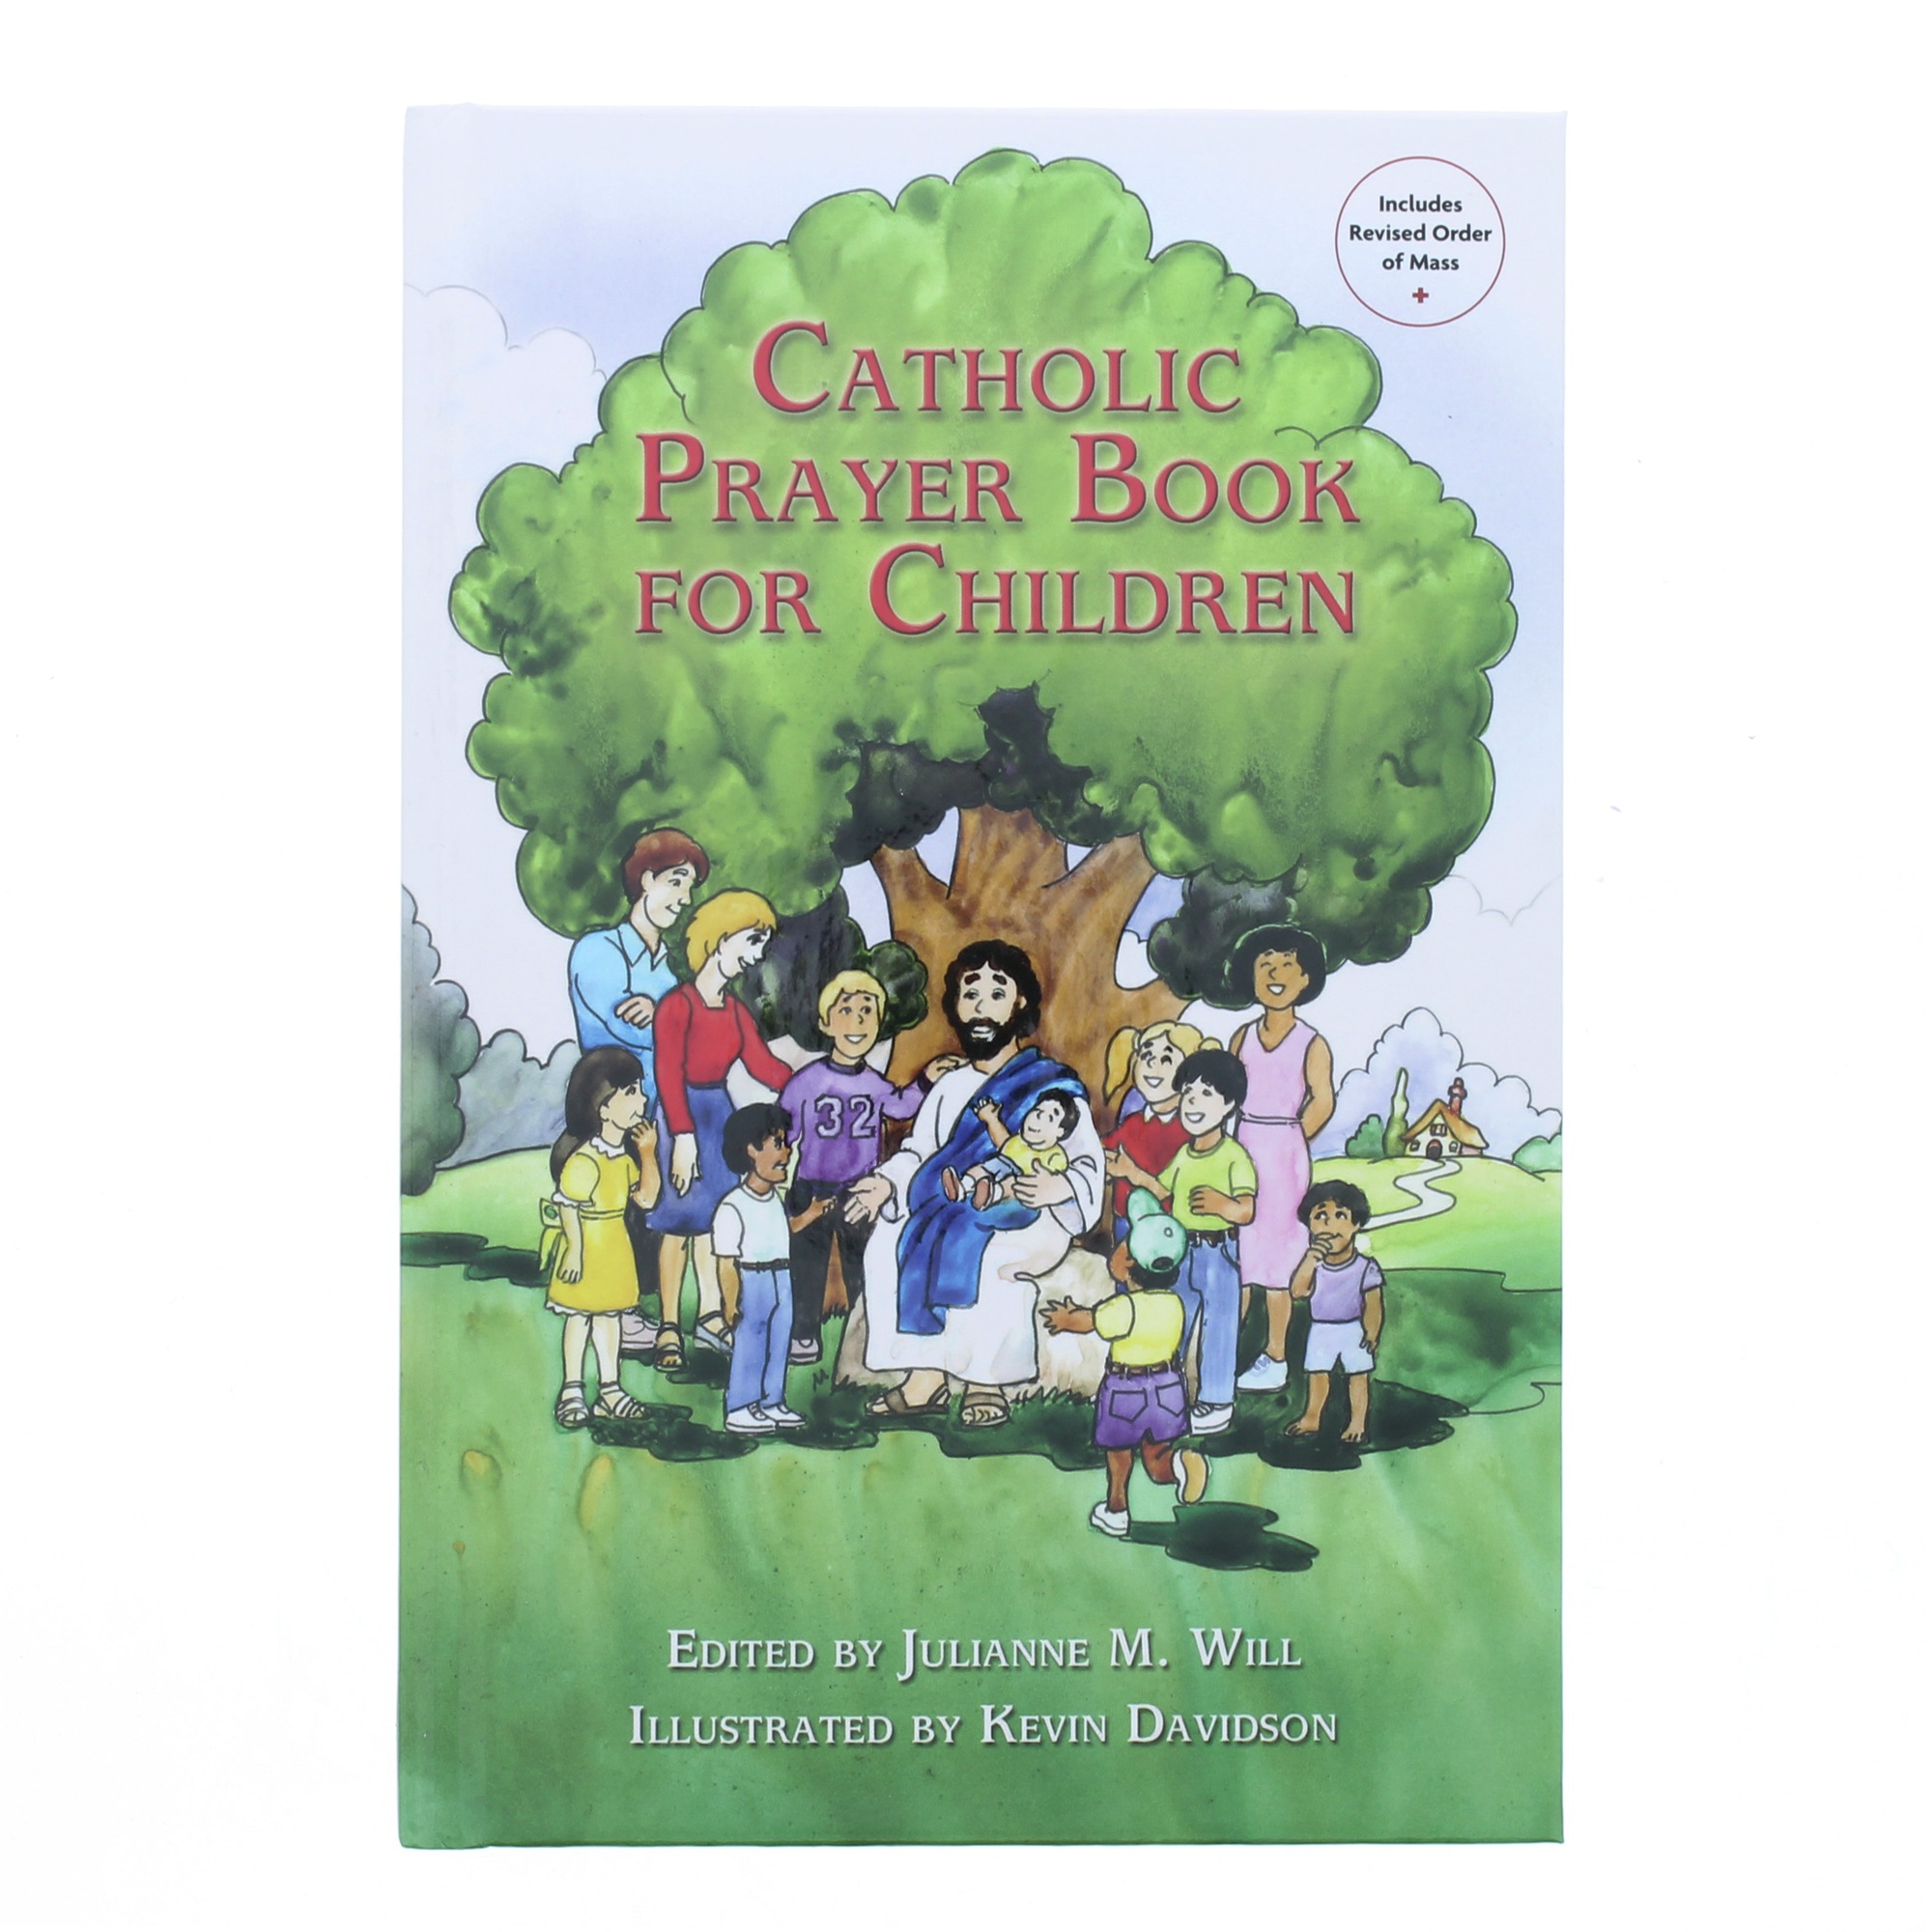 What are some books of kids' prayers?